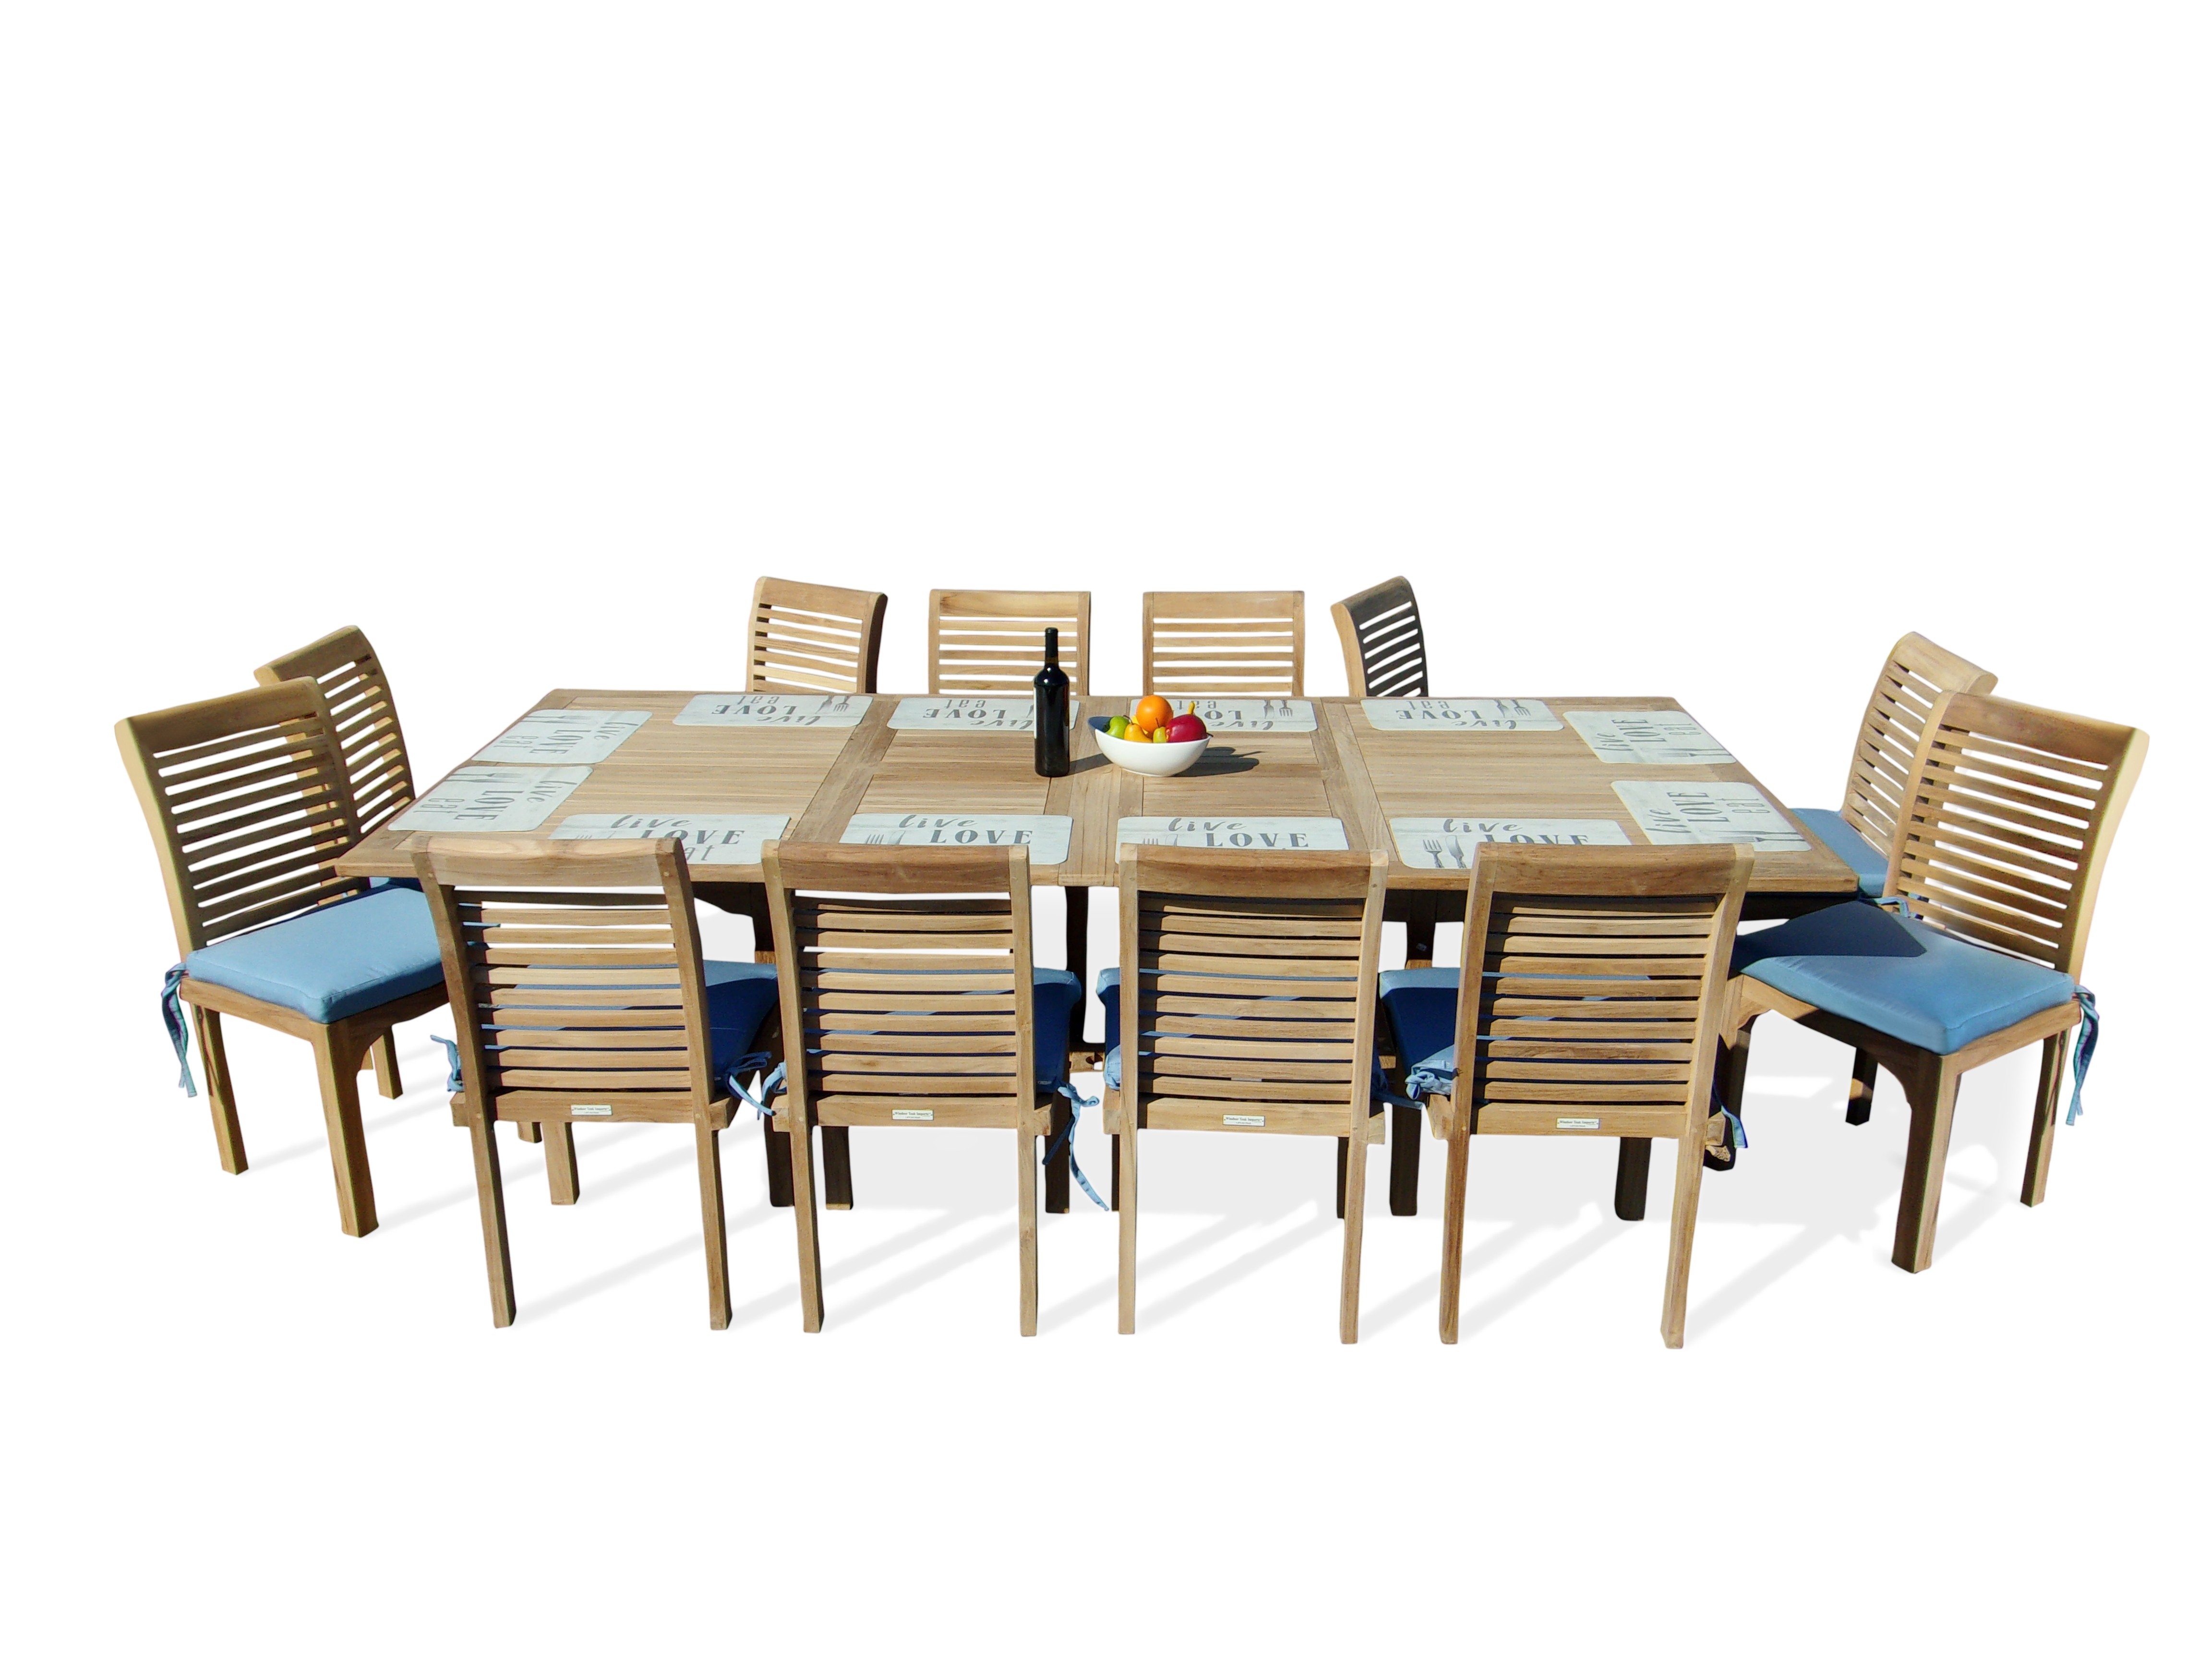  Buckingham Dining Height Extra WIDE 108" x 51" Double Leaf Rect Extension Table...w12 Stacking Armless Chairs ..makes 3 Different Size Tables